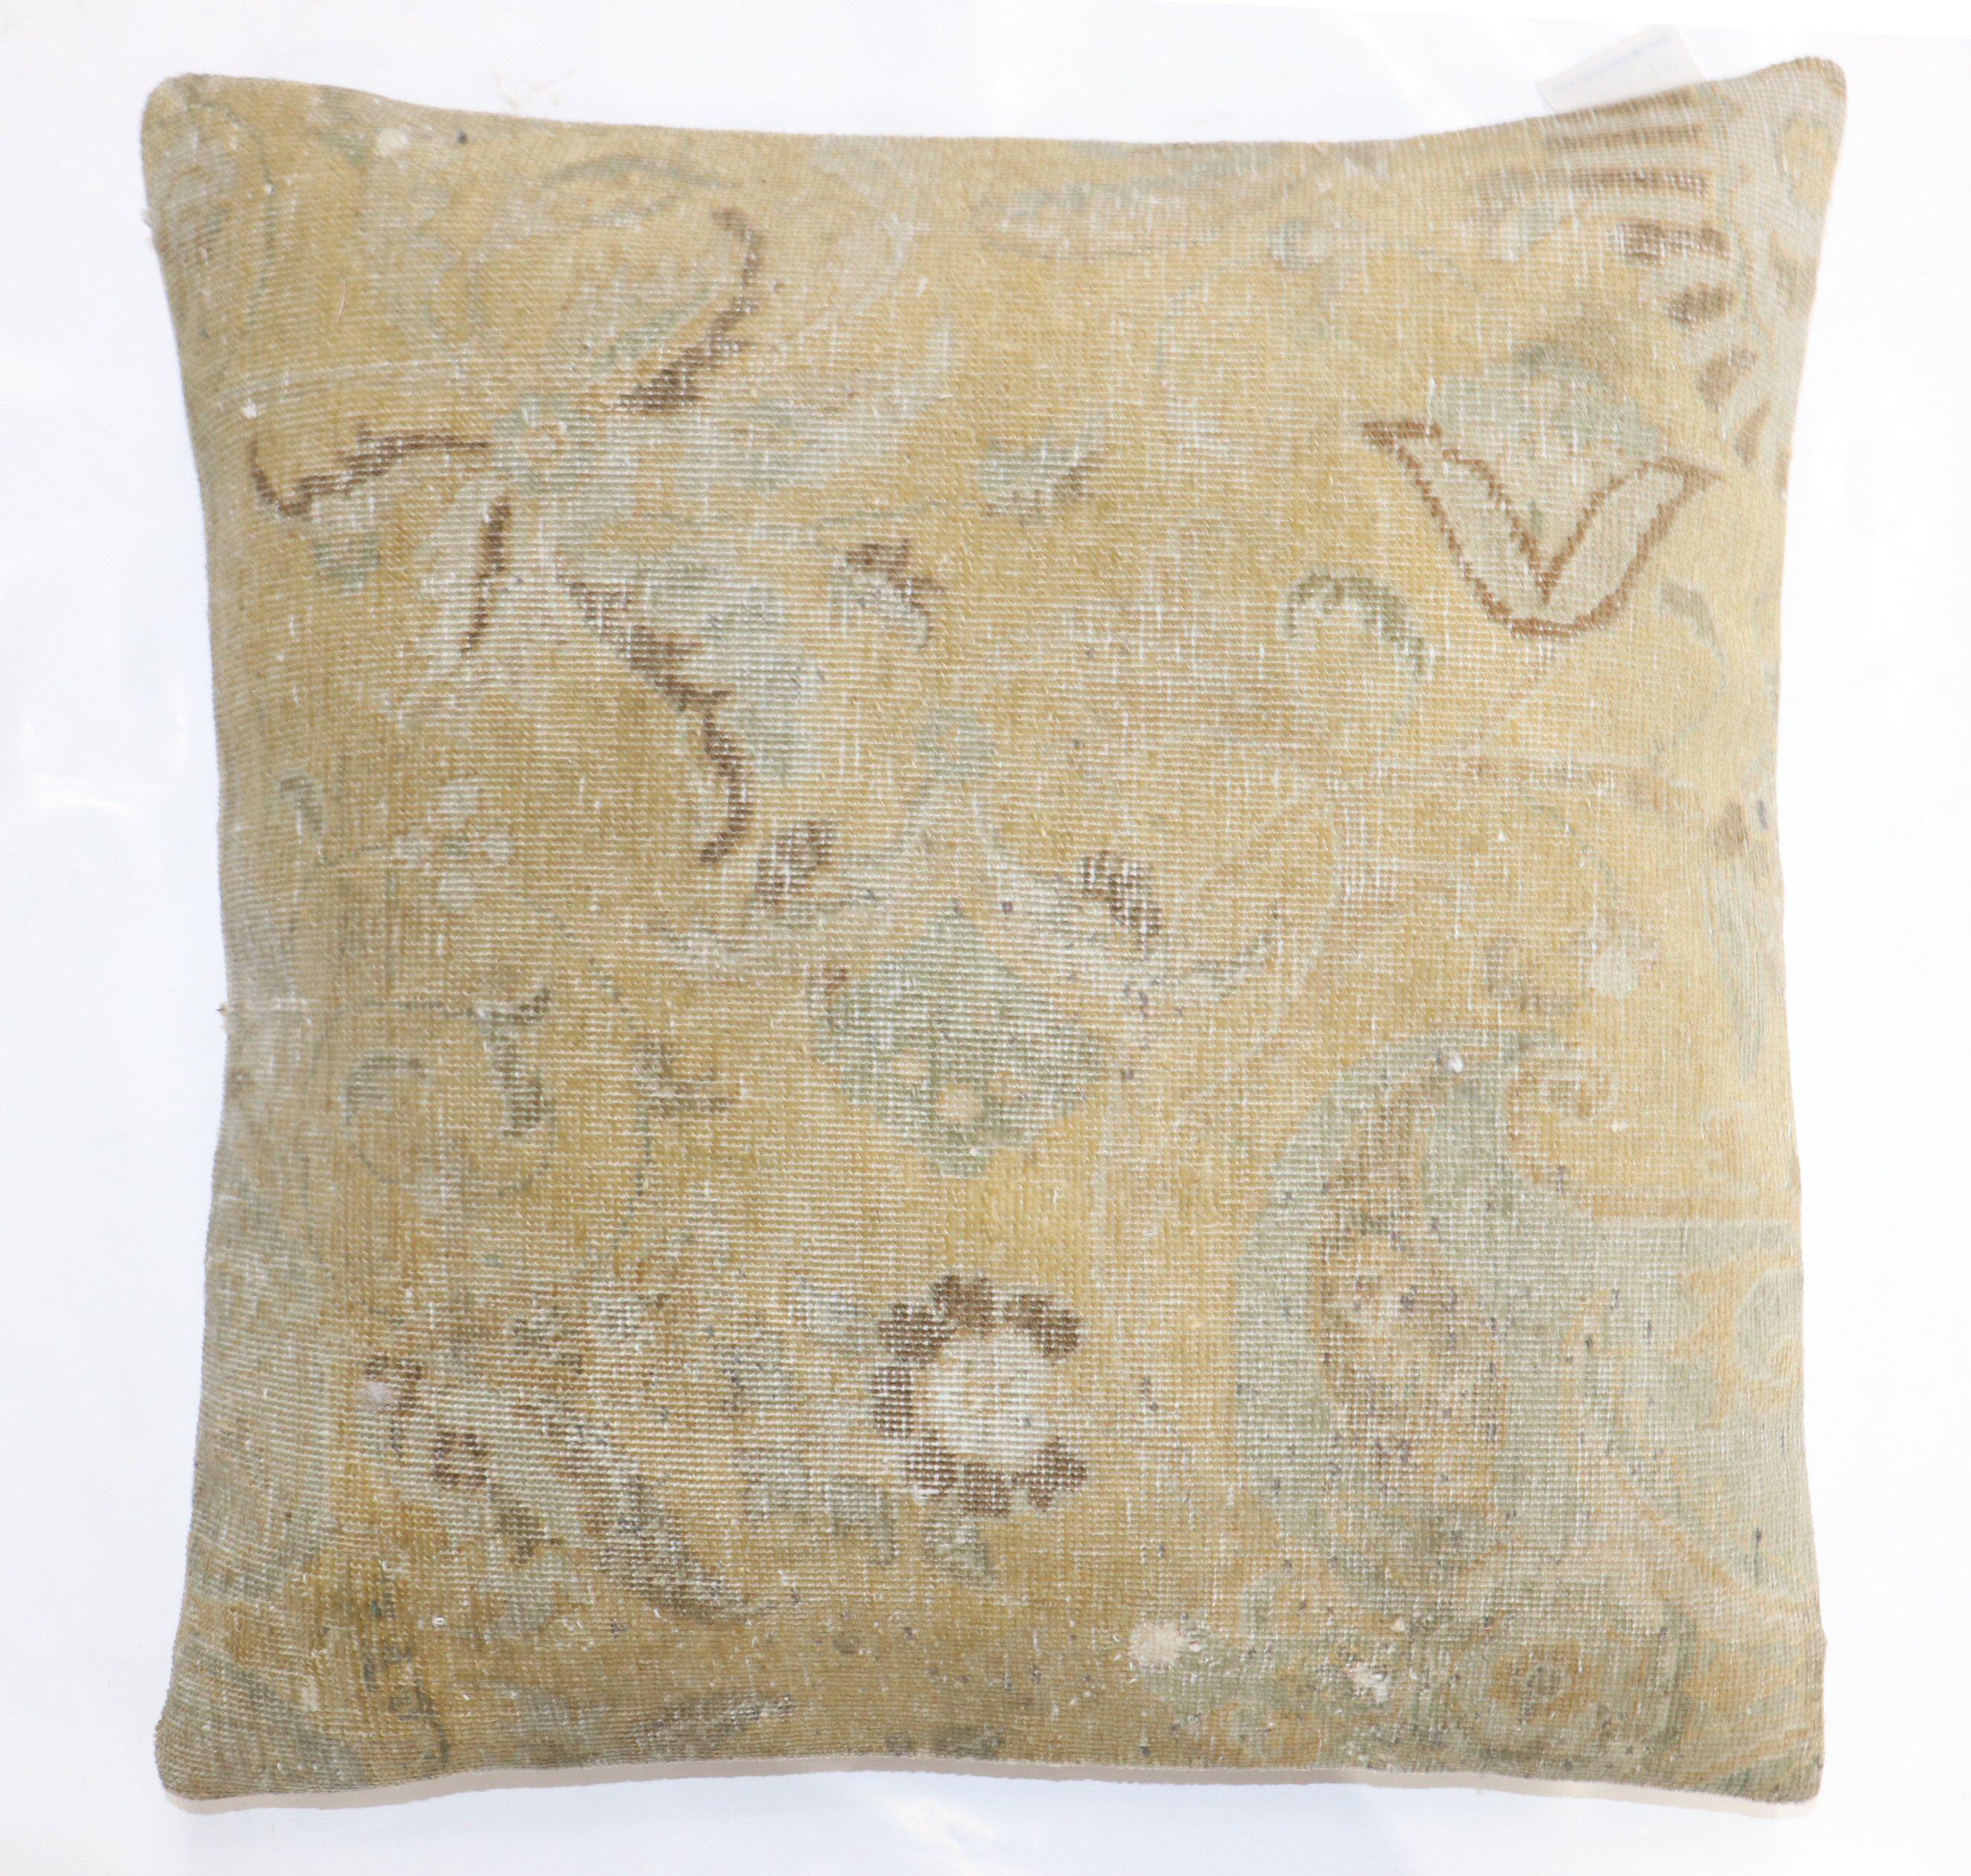 Large square size pillow made from a finely woven gold color persian tabriz rug.

Measures: 23'' x 23''.